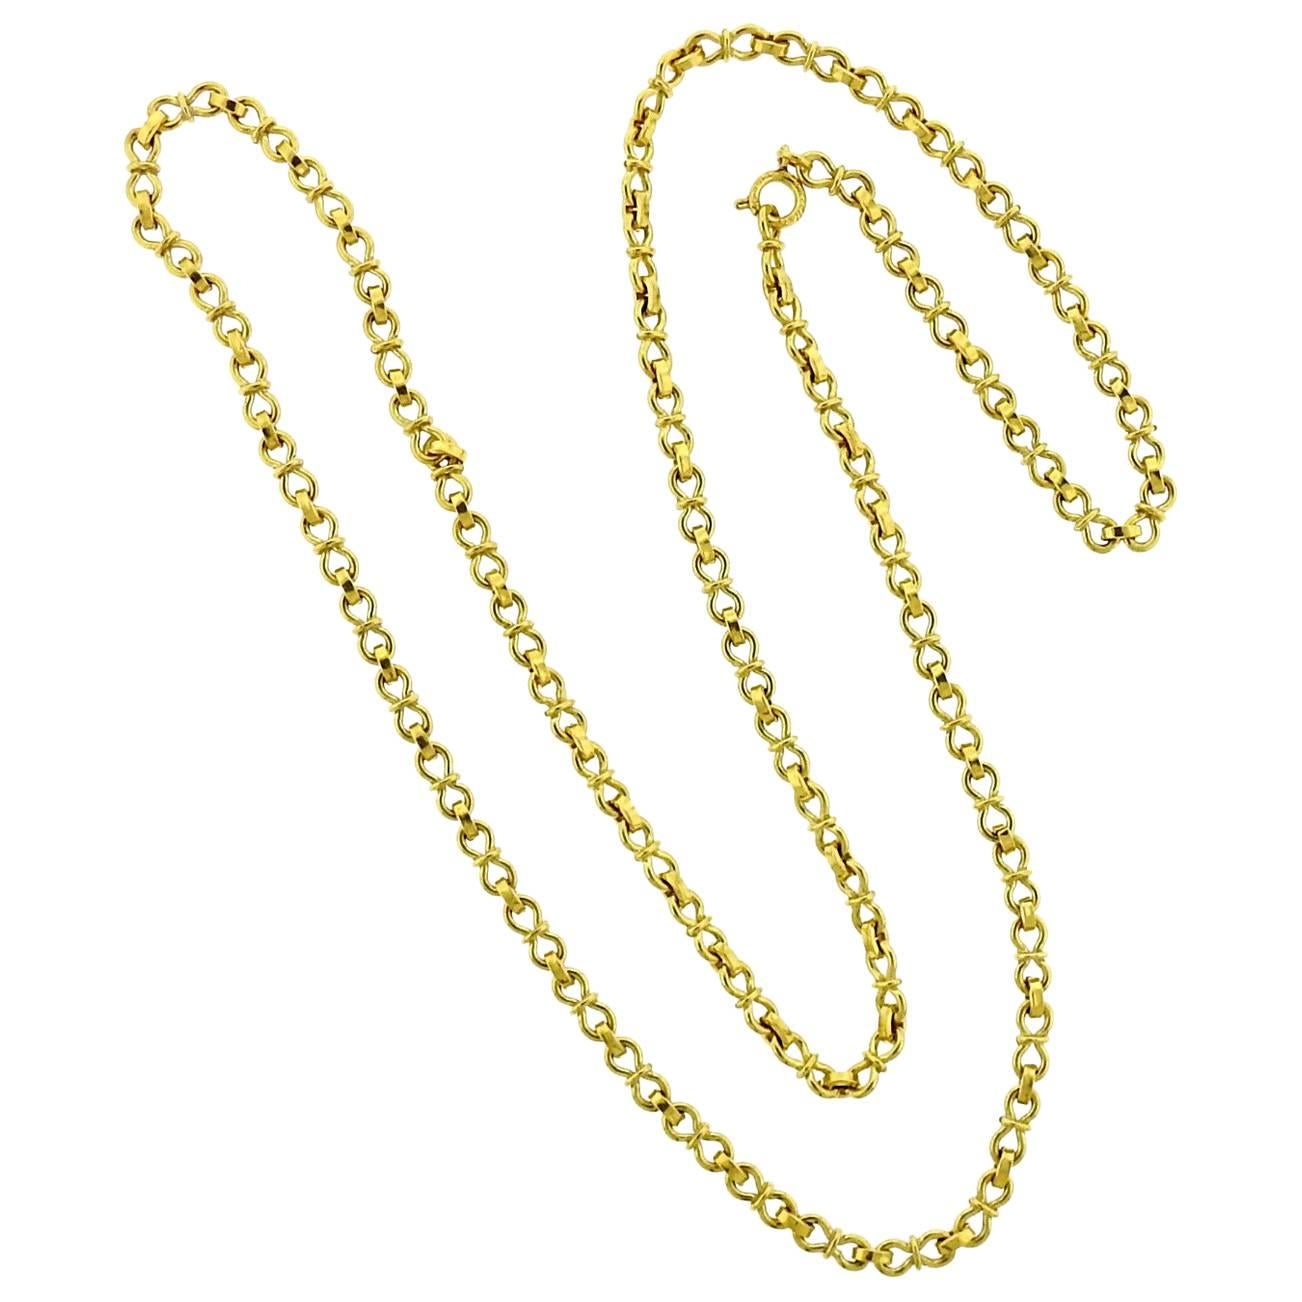 Buccellati Gold Long Chain Necklace